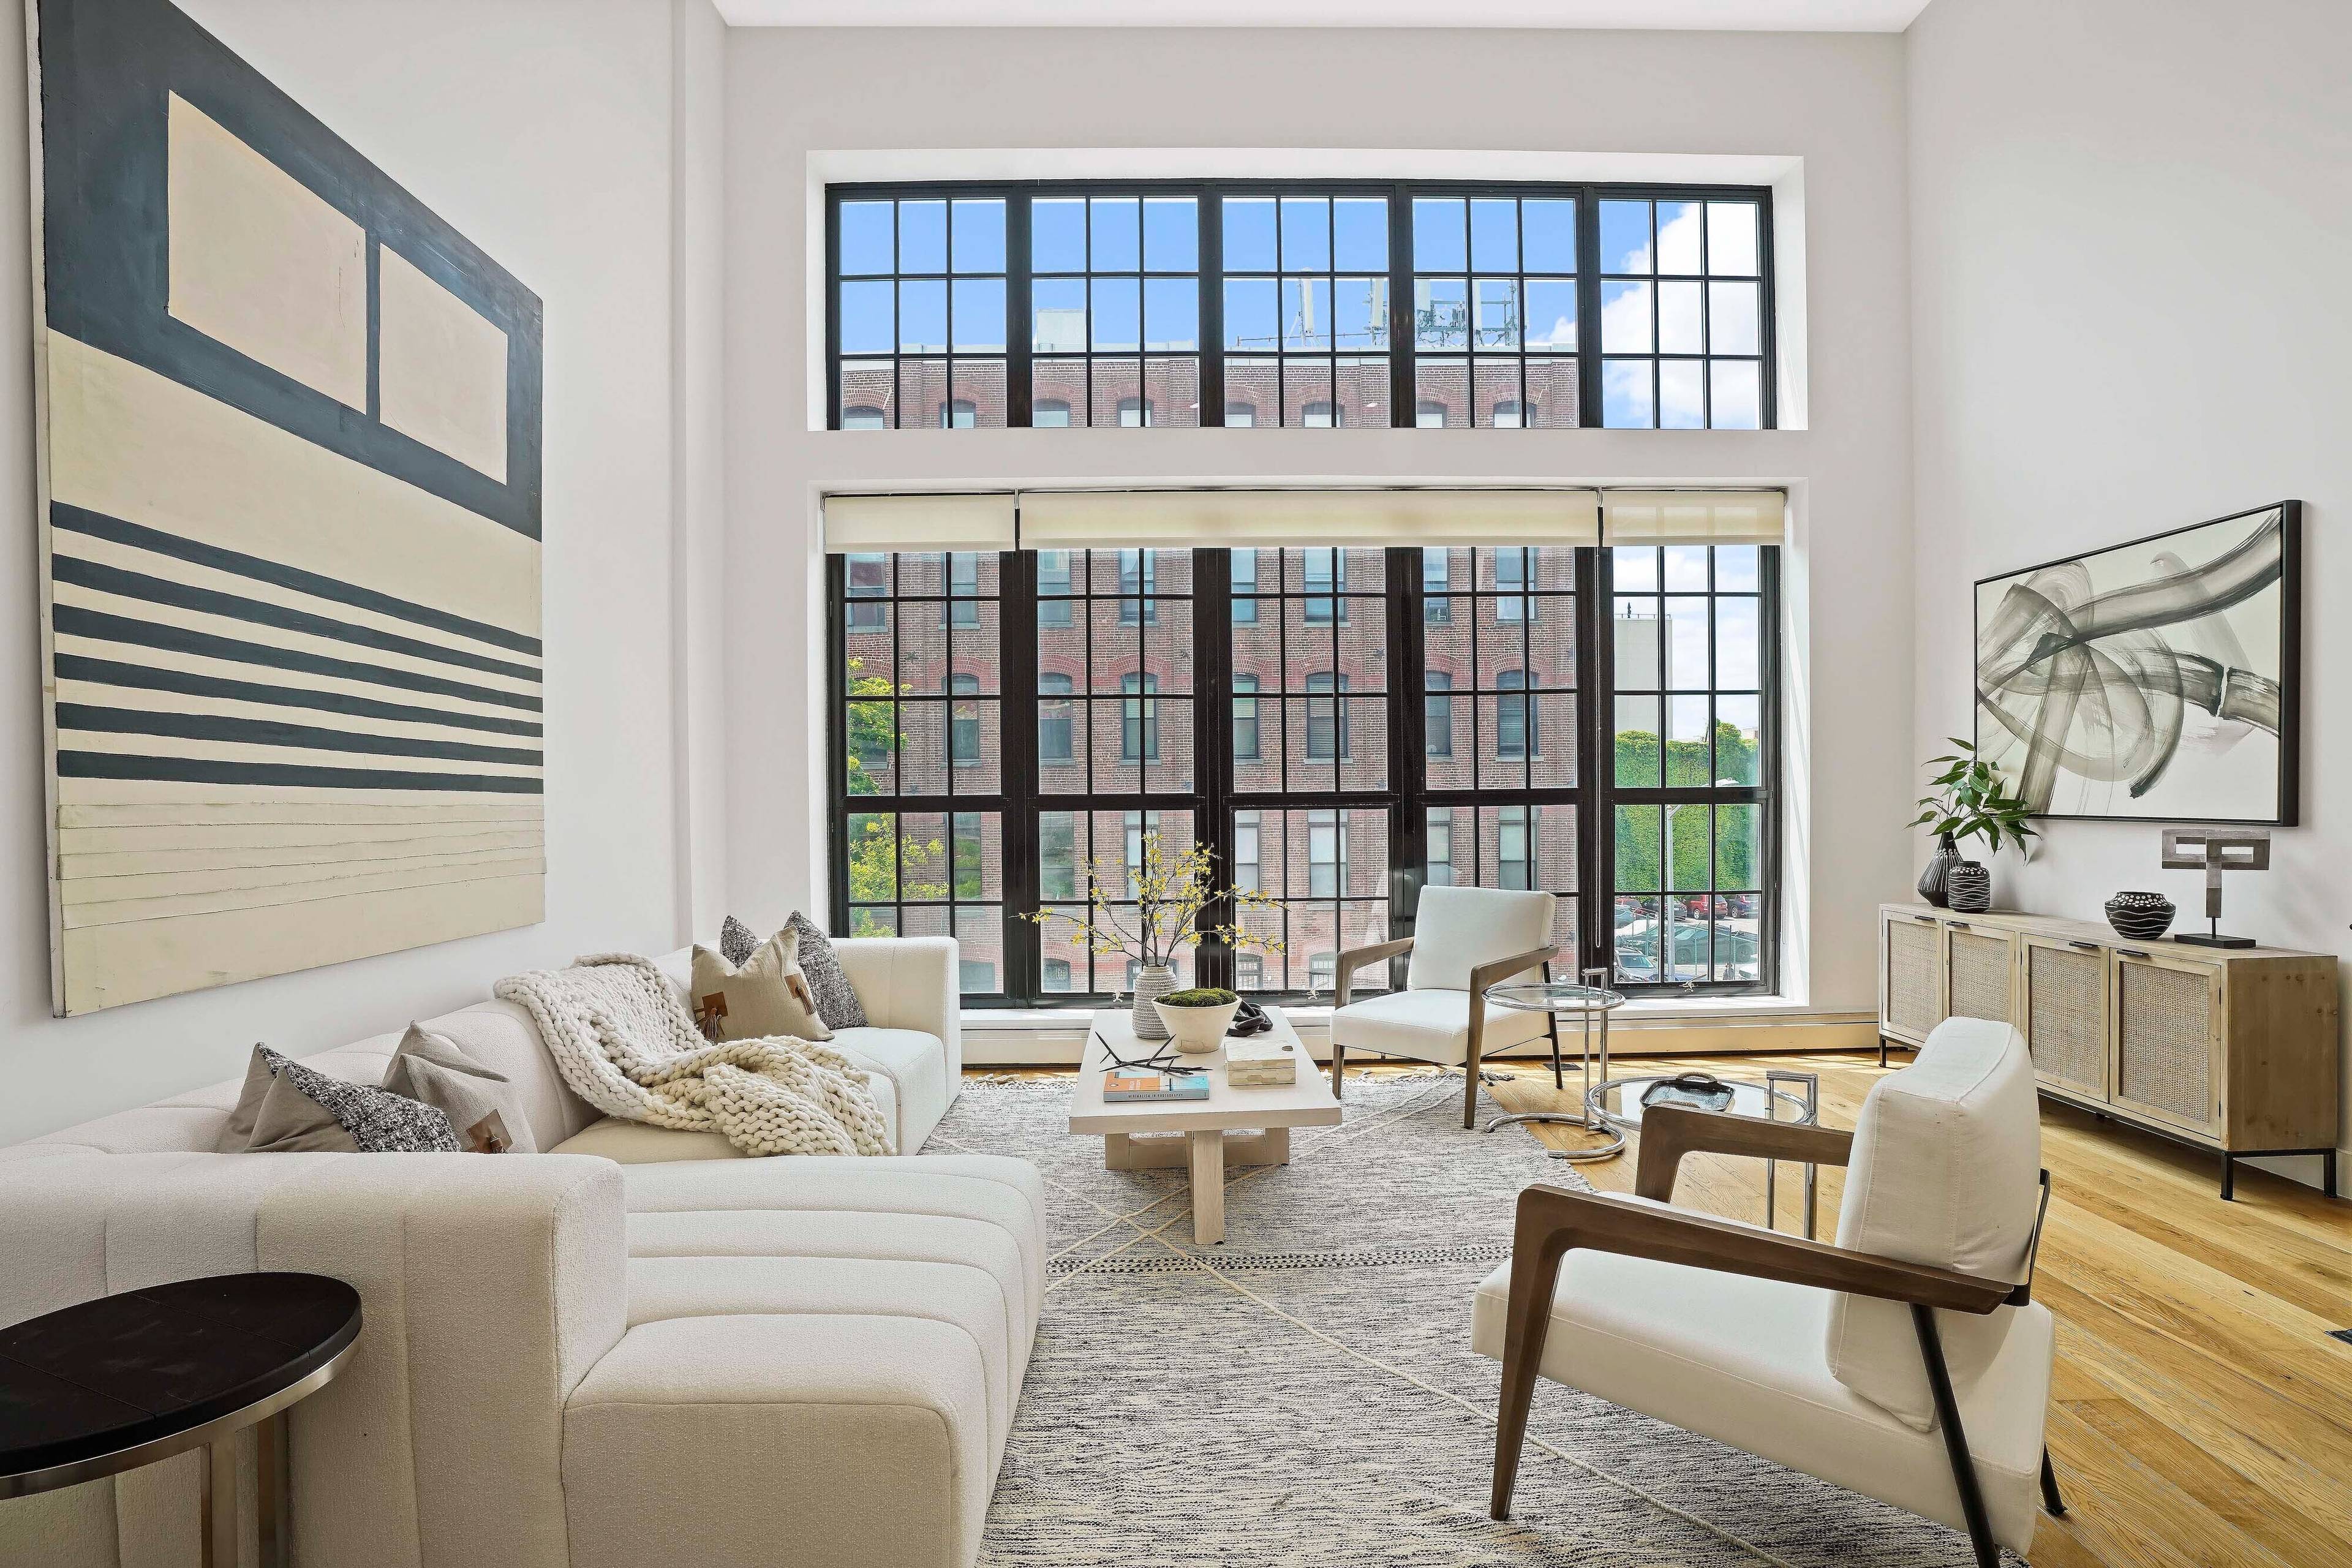 Welcome to a luxurious duplex condo located in the coveted Cobble Hill area of Brooklyn.